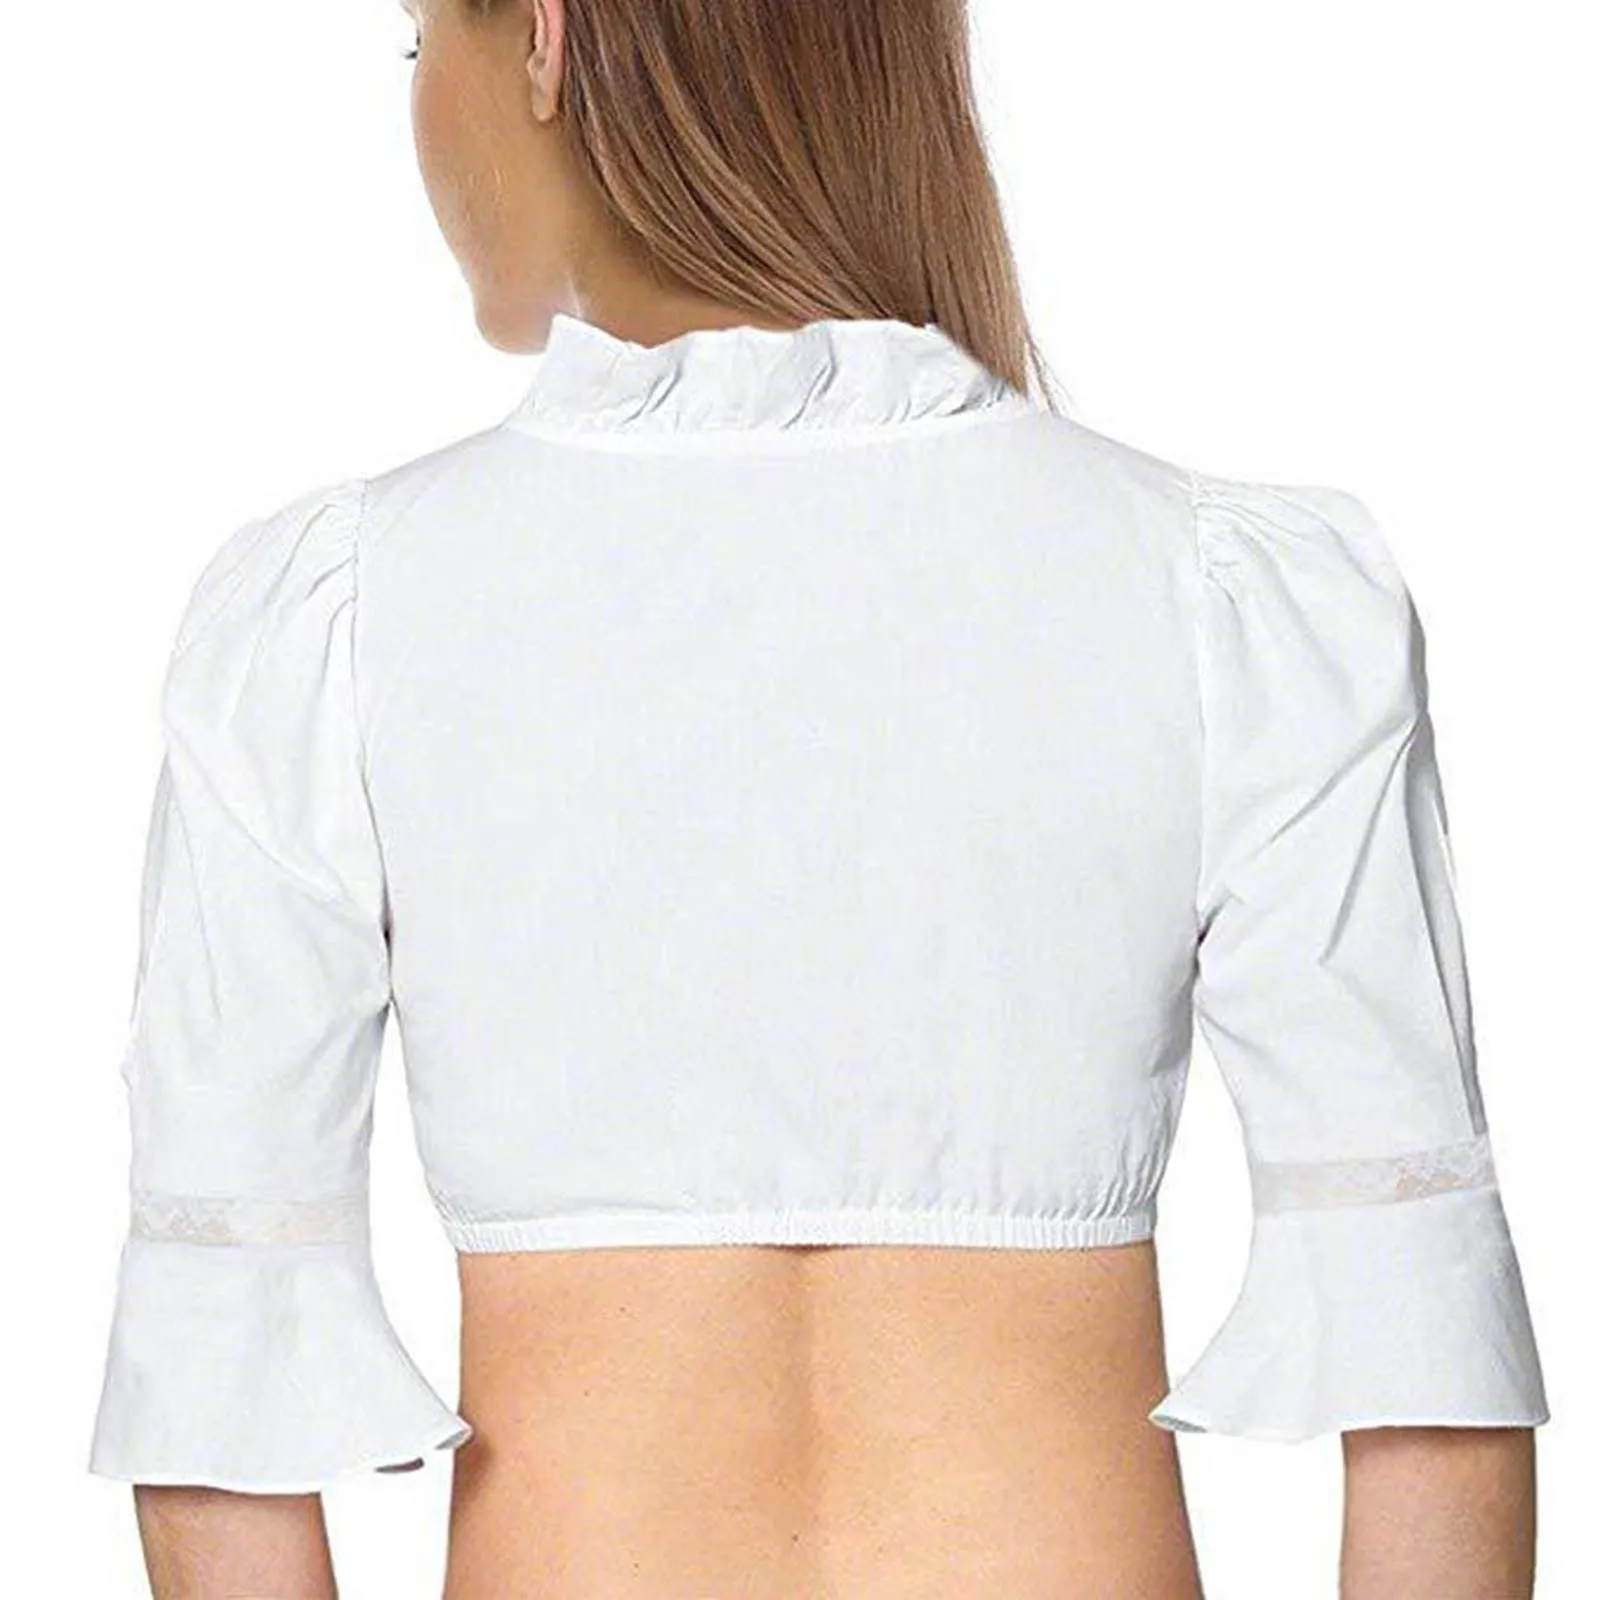  Women's German Dirndl Blouse Puffy White Cropped Tops